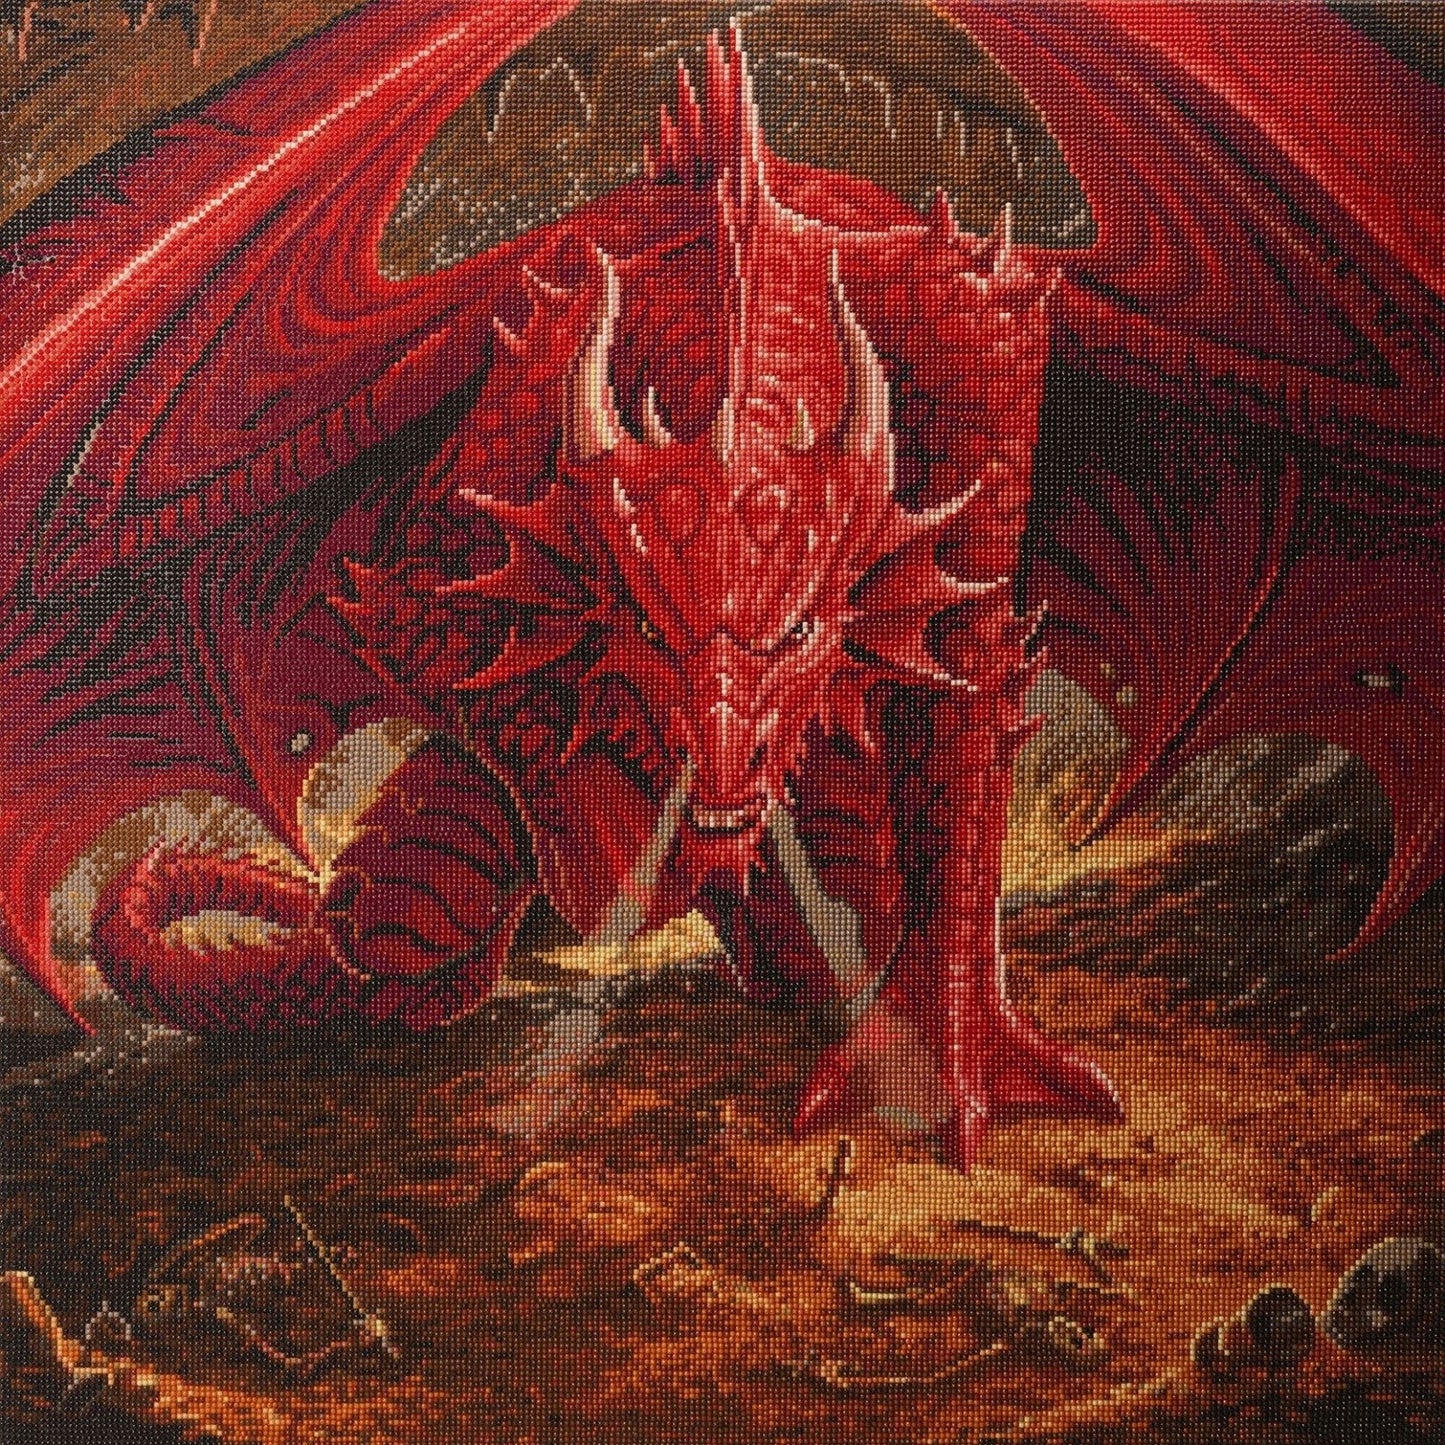 CAK-AST4: "Dragons Lair" 70 x 70cm (Extra Large) - Anne Stokes